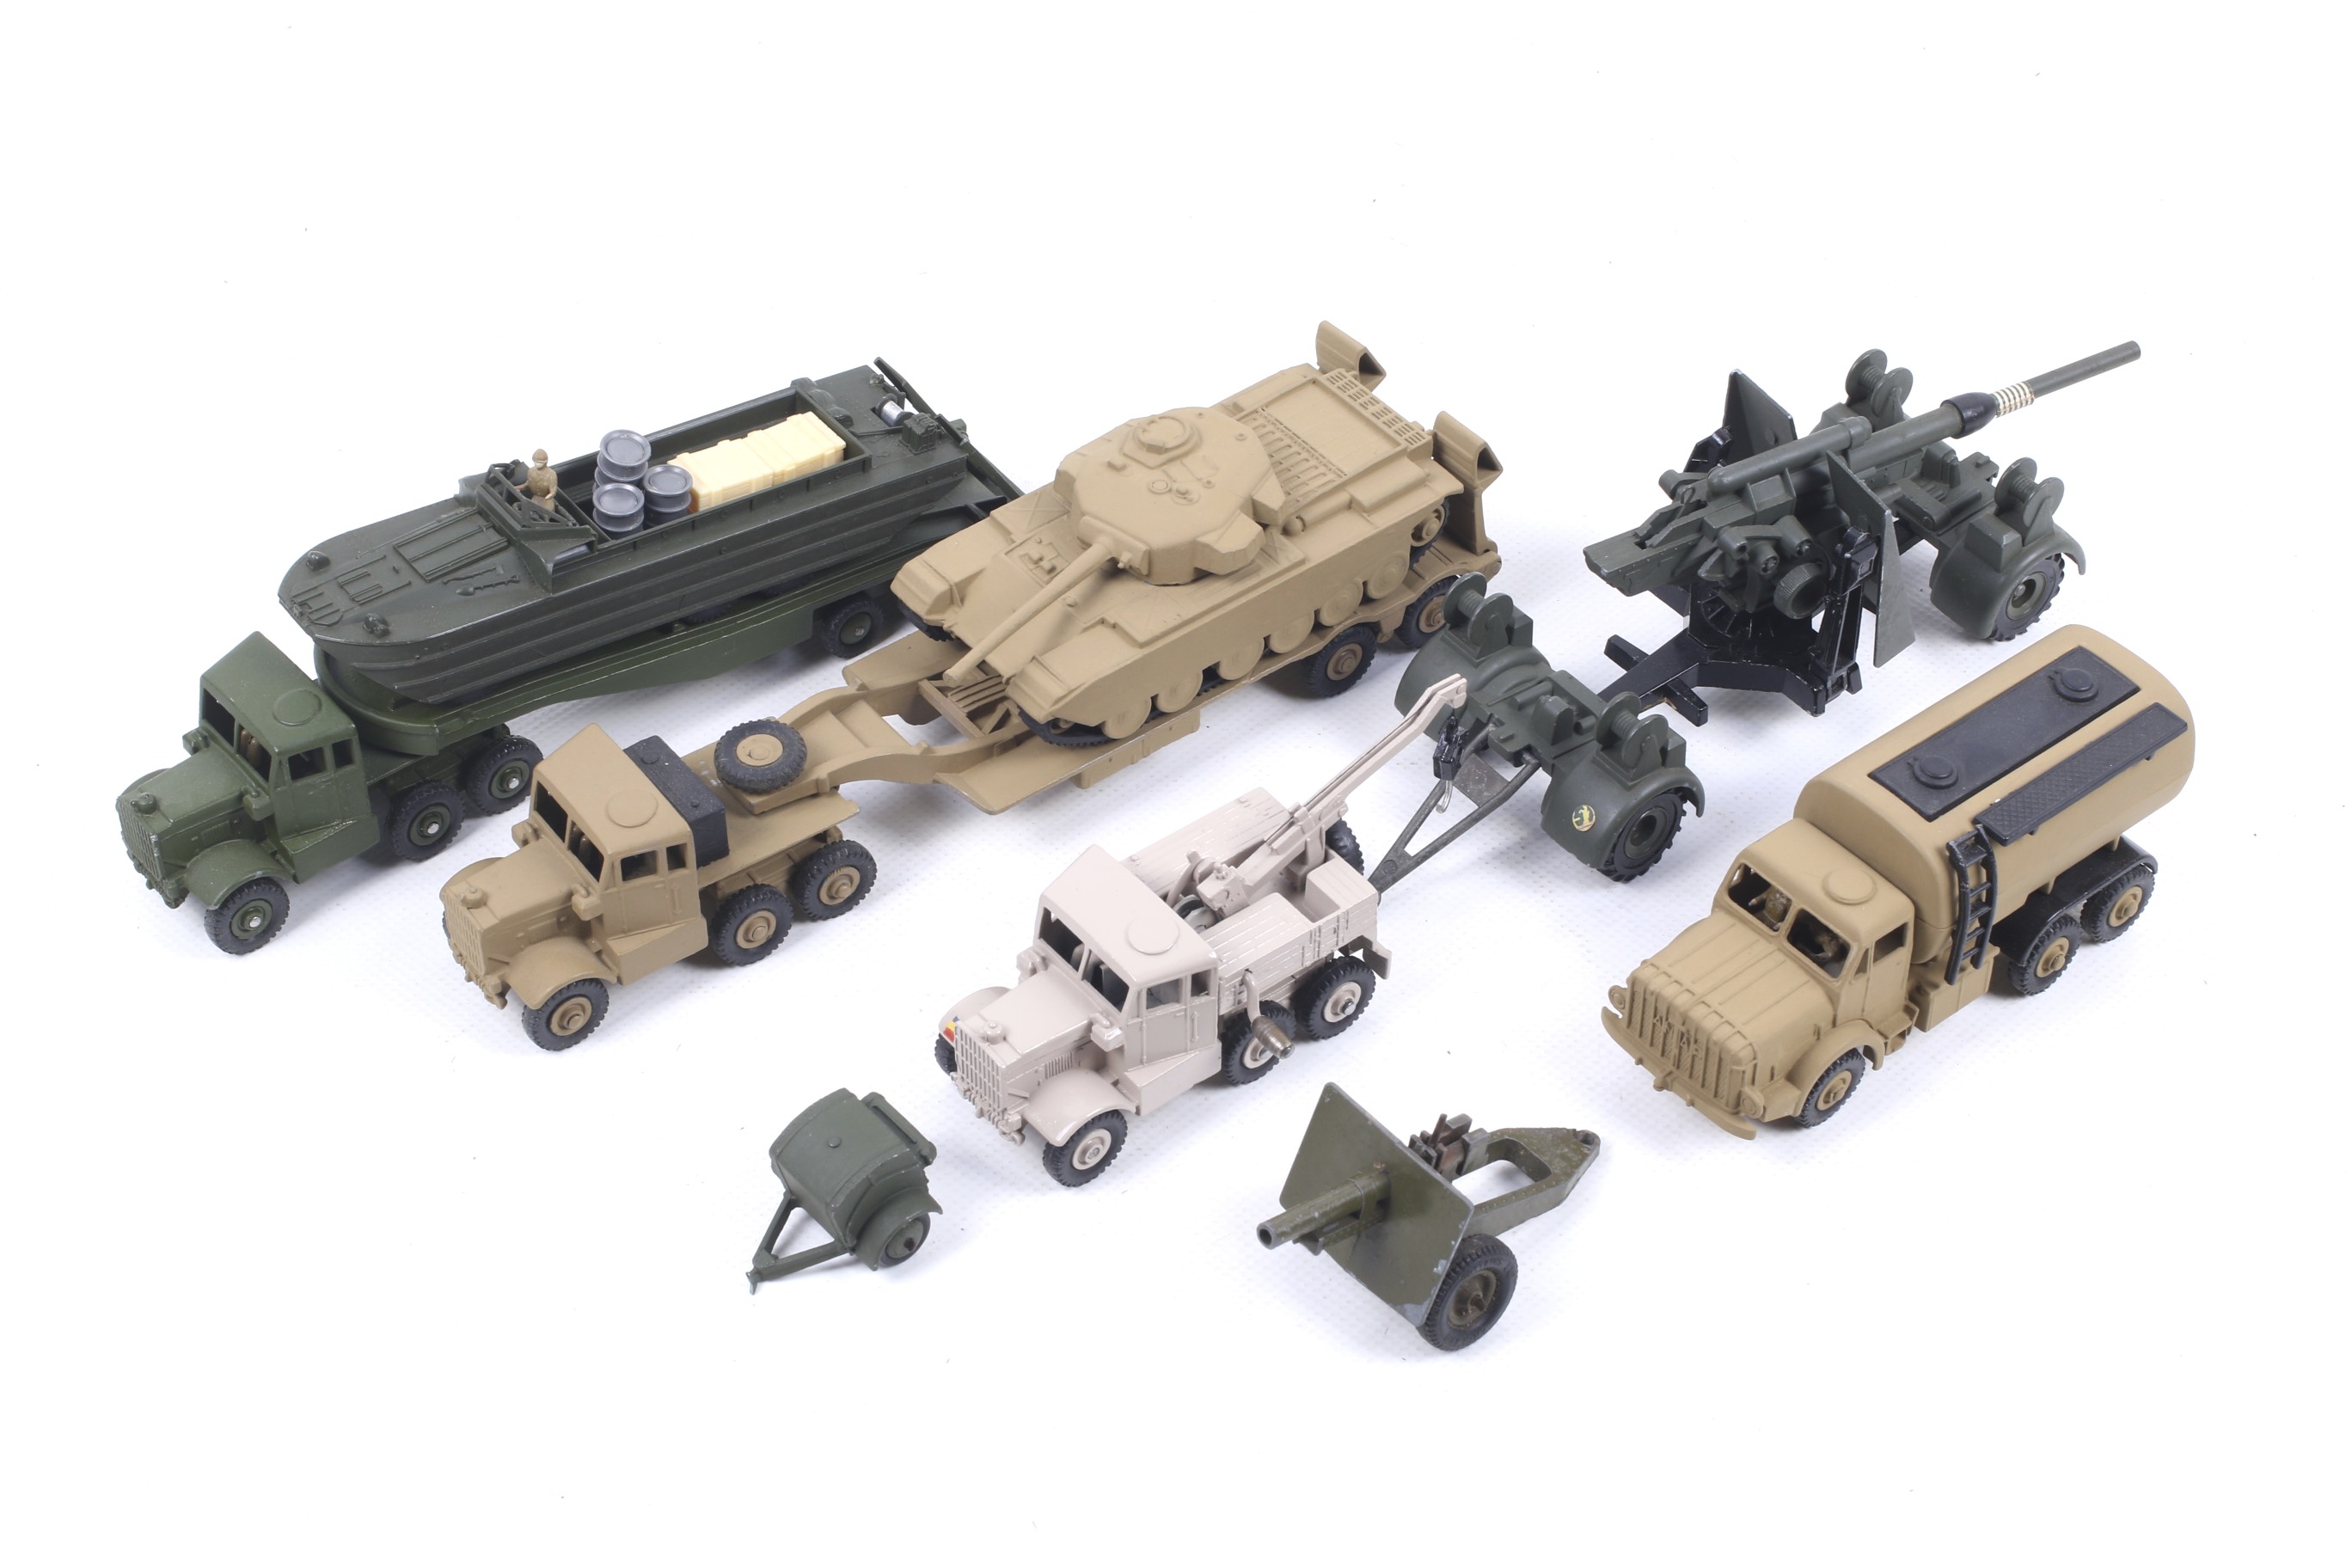 A collection of diecast military vehicles.